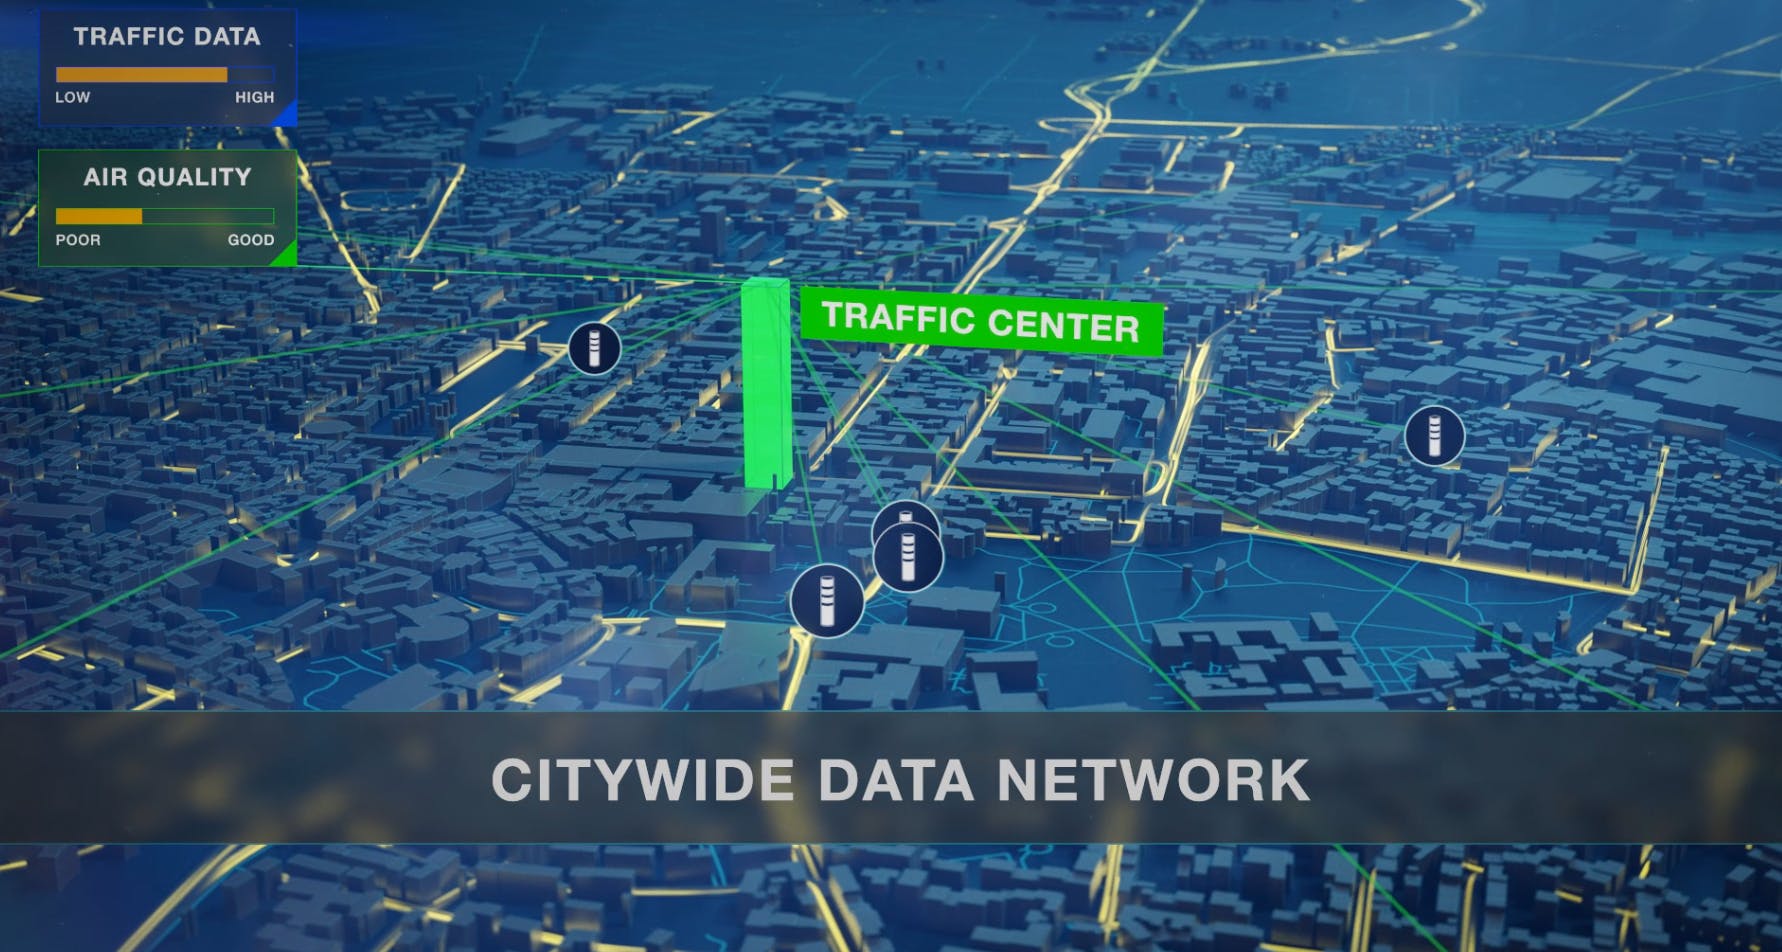 A Citywide Data Network with VITRONIC